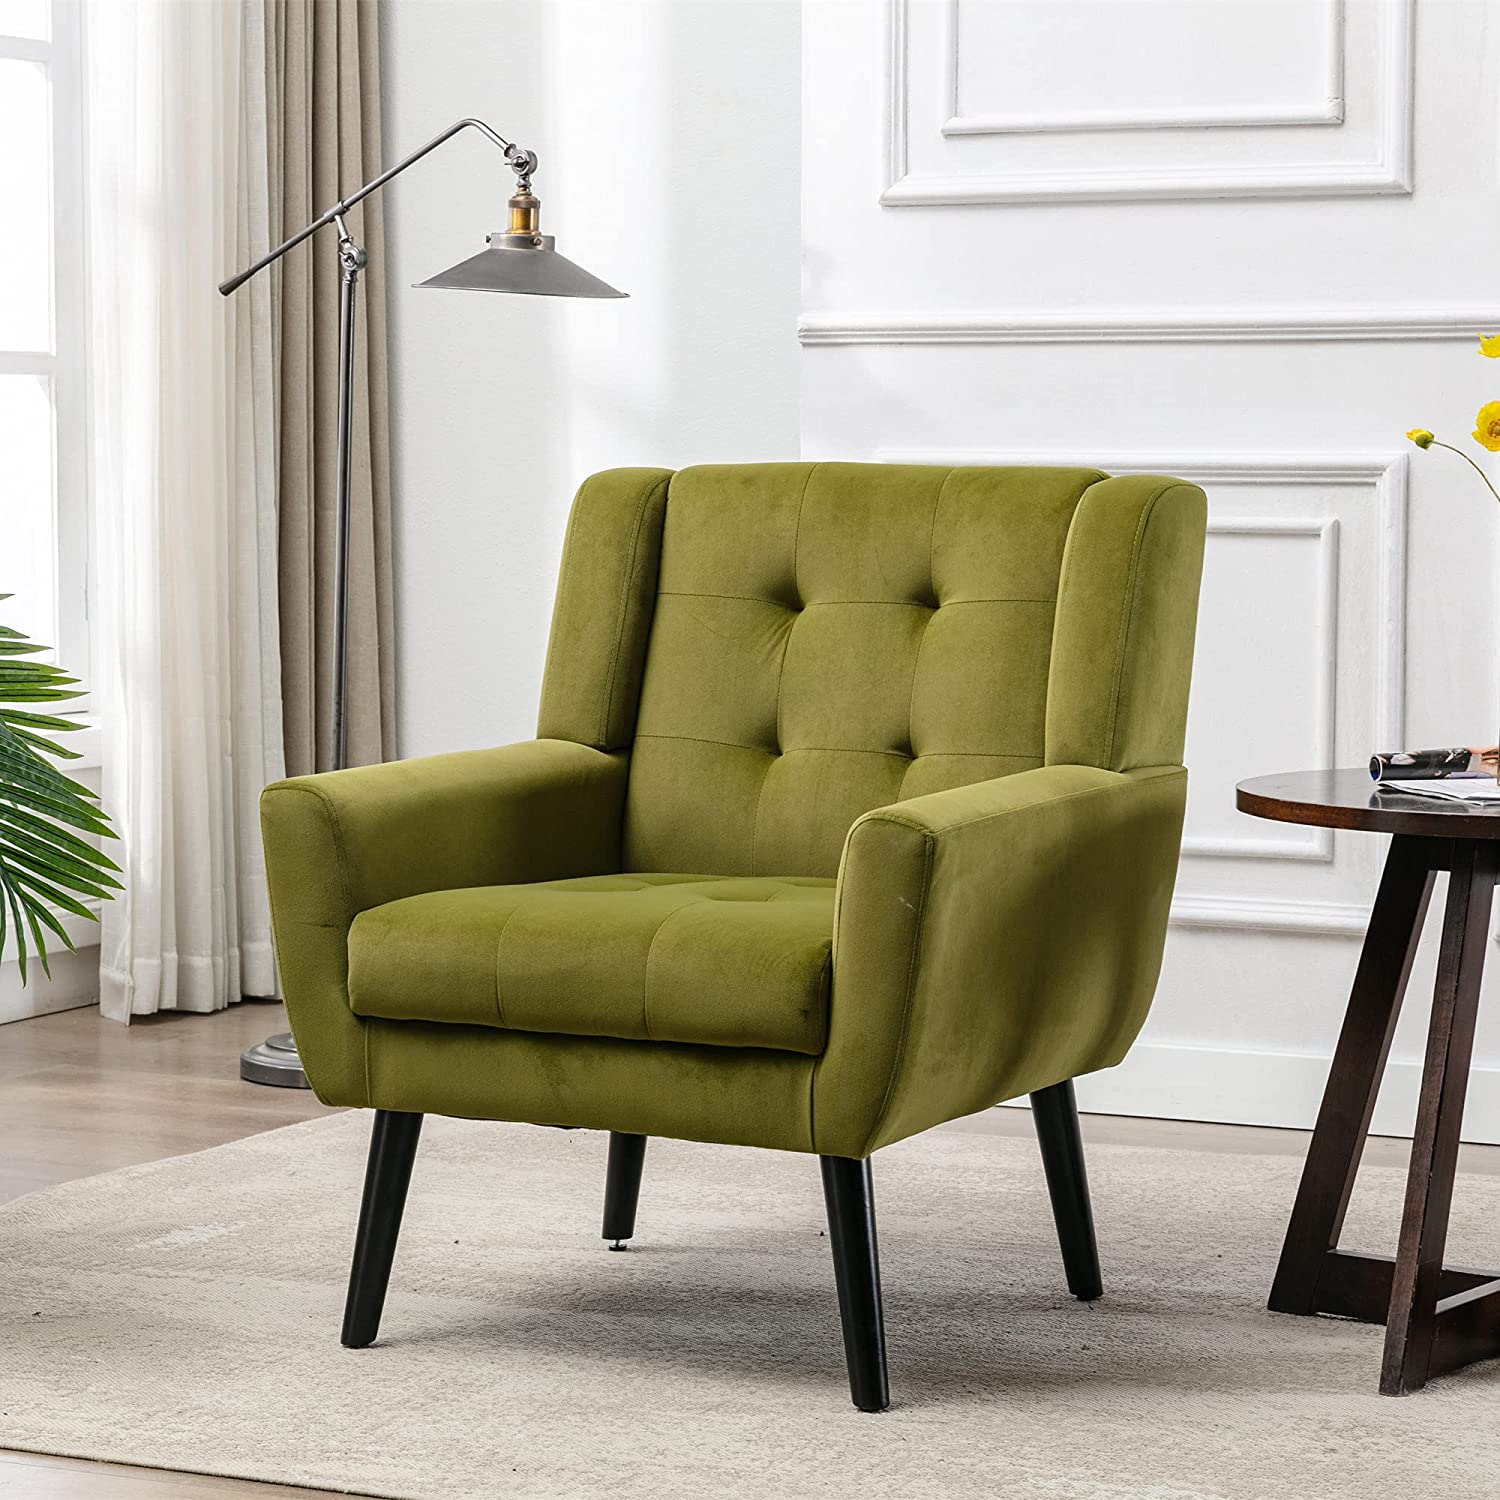 Modern Accent Chair with Arms, Upholstered Linen Fabric Reading Side Chair Tufted Back Decorative Wingback Chair for Living Room Bedroom